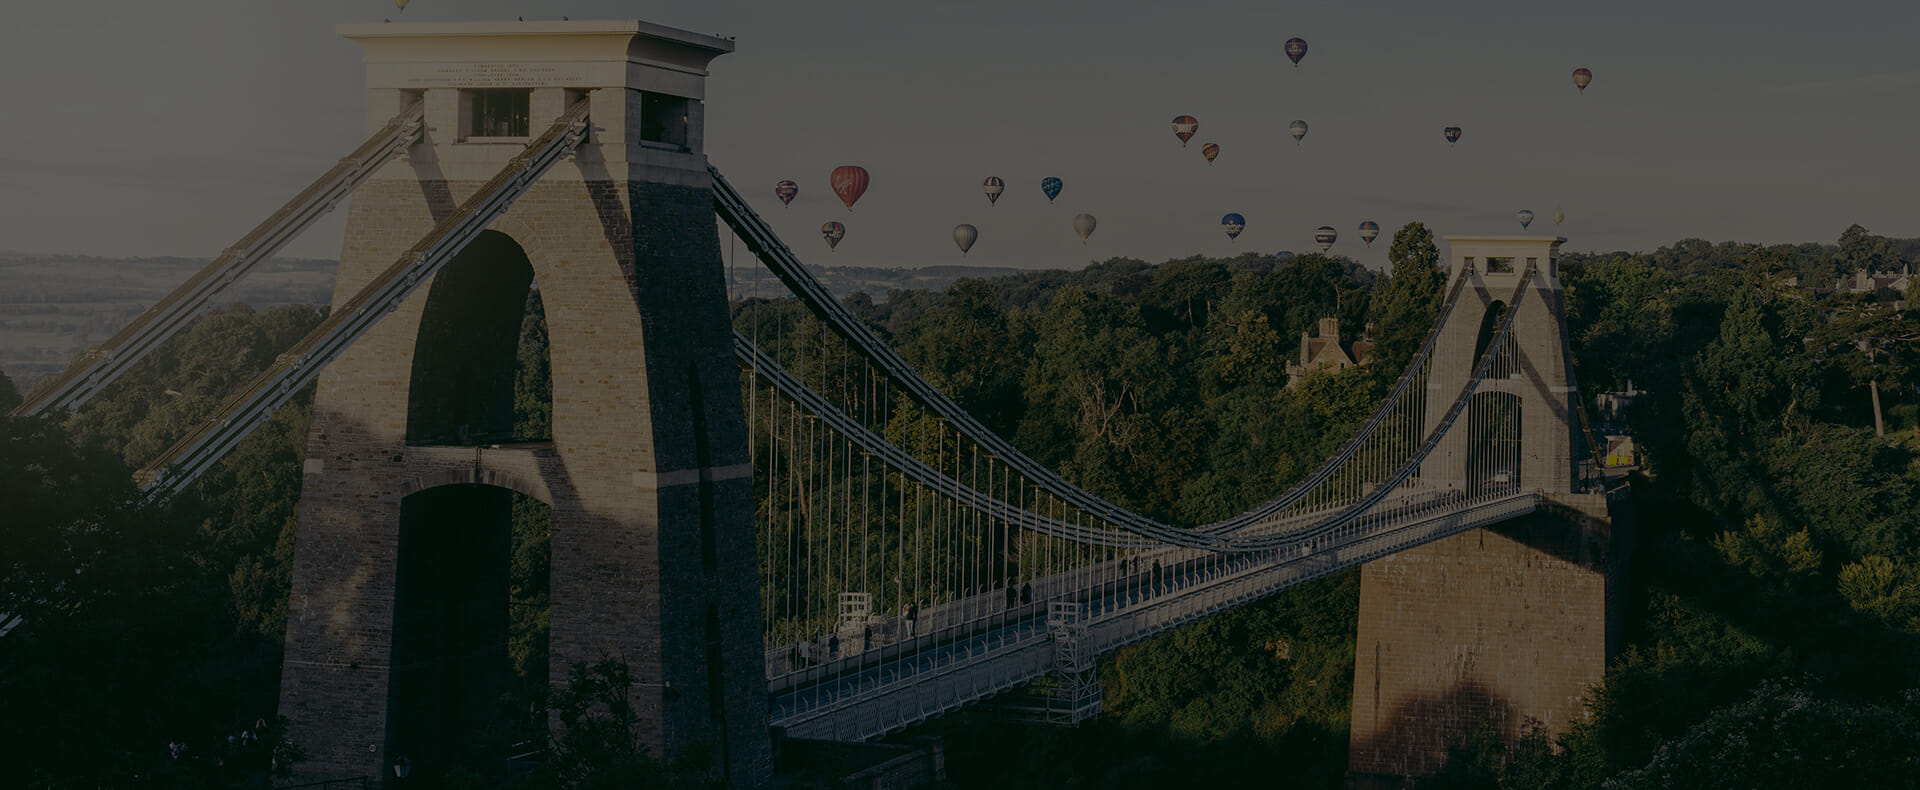 clifton suspension bridge bristol with trees and hot air balloons